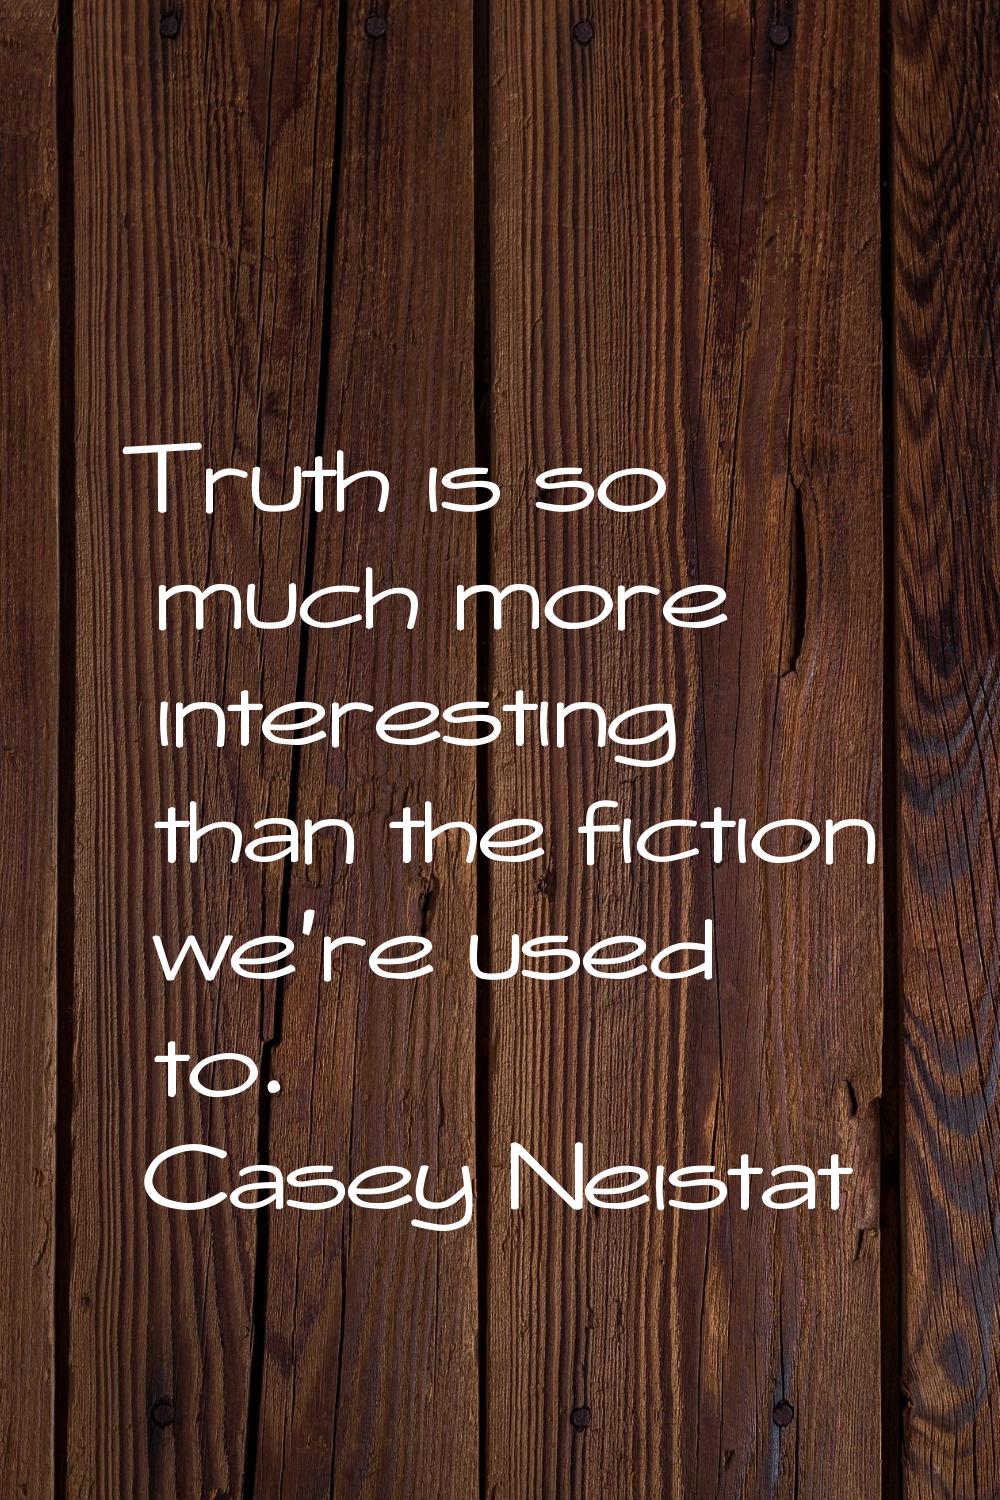 Truth is so much more interesting than the fiction we're used to.